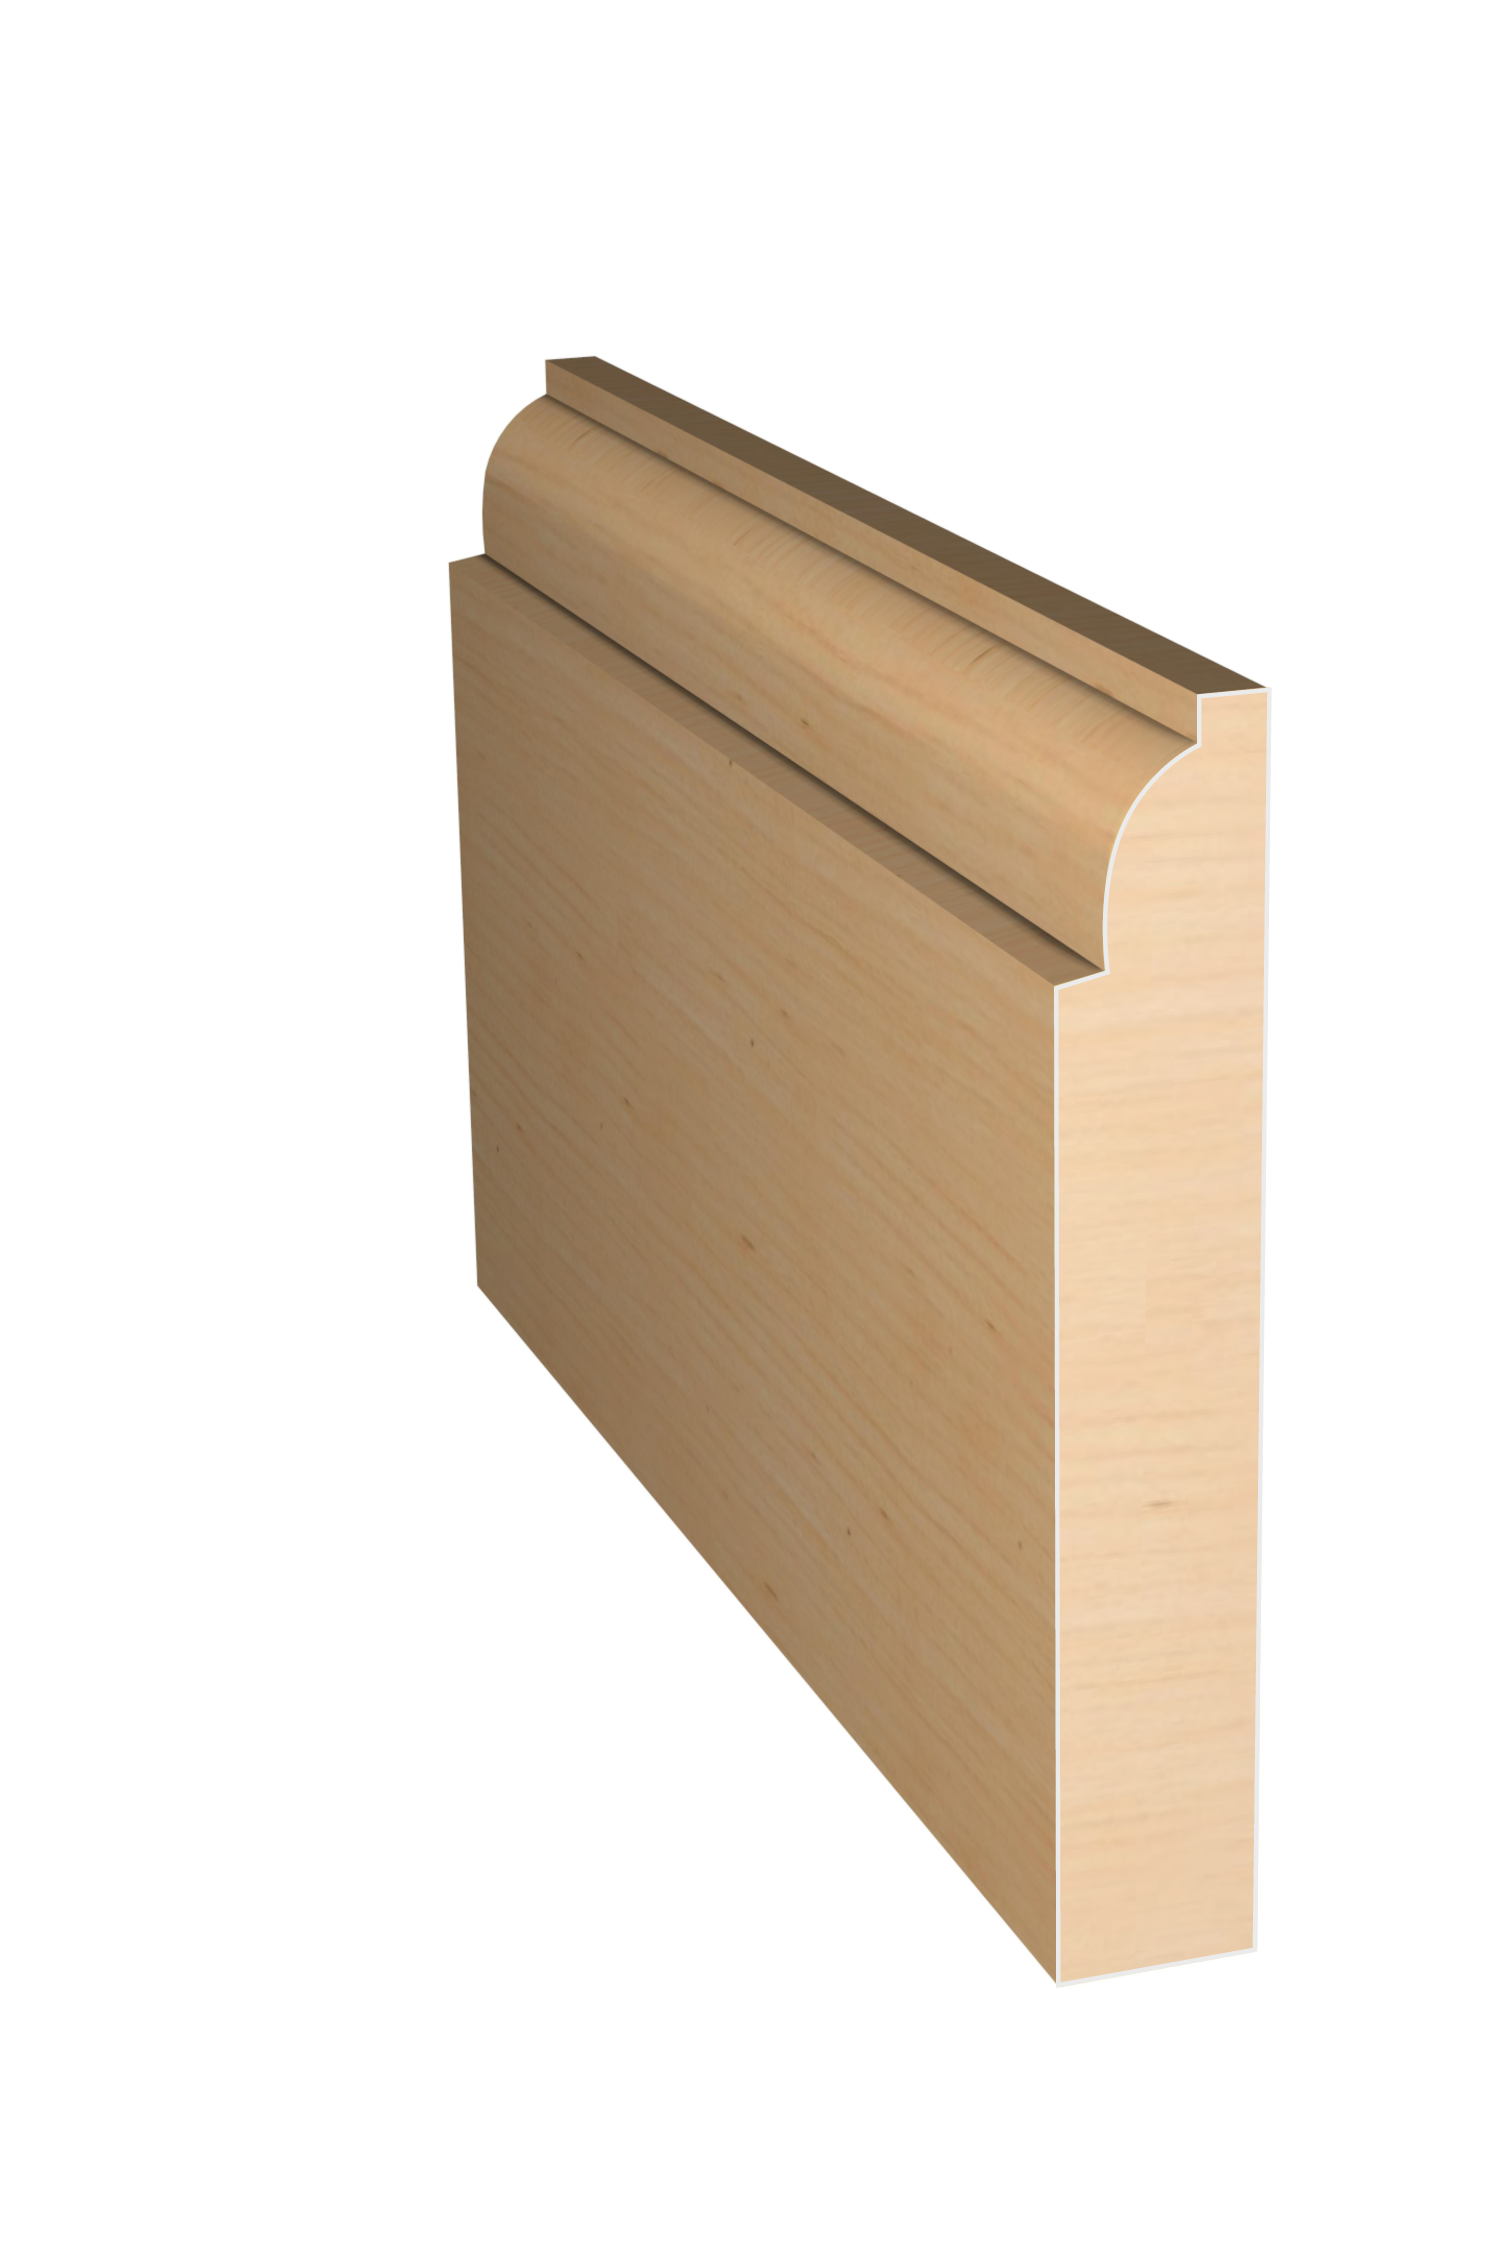 Three dimensional rendering of custom casing wood molding CAPL31243 made by Public Lumber Company in Detroit.